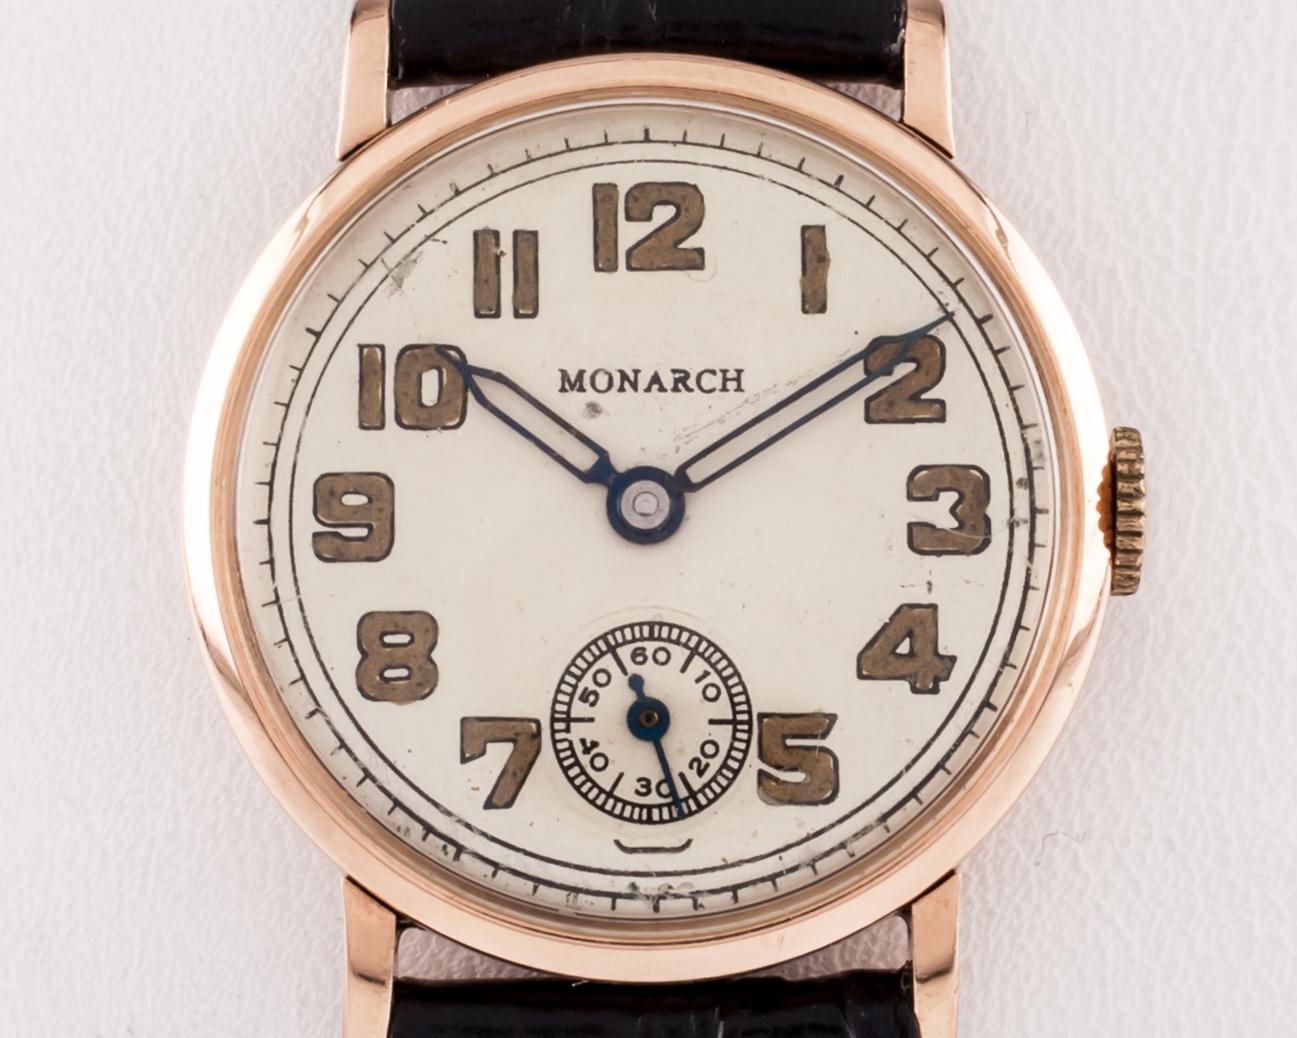 Monarch 14k Rose Gold Round Hand-Wind Vintage Watch w/ Leather Band
Movement #1123
14k Rose Gold Round Case
28 mm in Diameter (30 mm w/ Crown)
Lug-to-Lug Width = 16 mm
Lug-to-Lug Distance = 34 mm
Thickness = 7 mm
Champagne Dial w/ Gold Numbers and